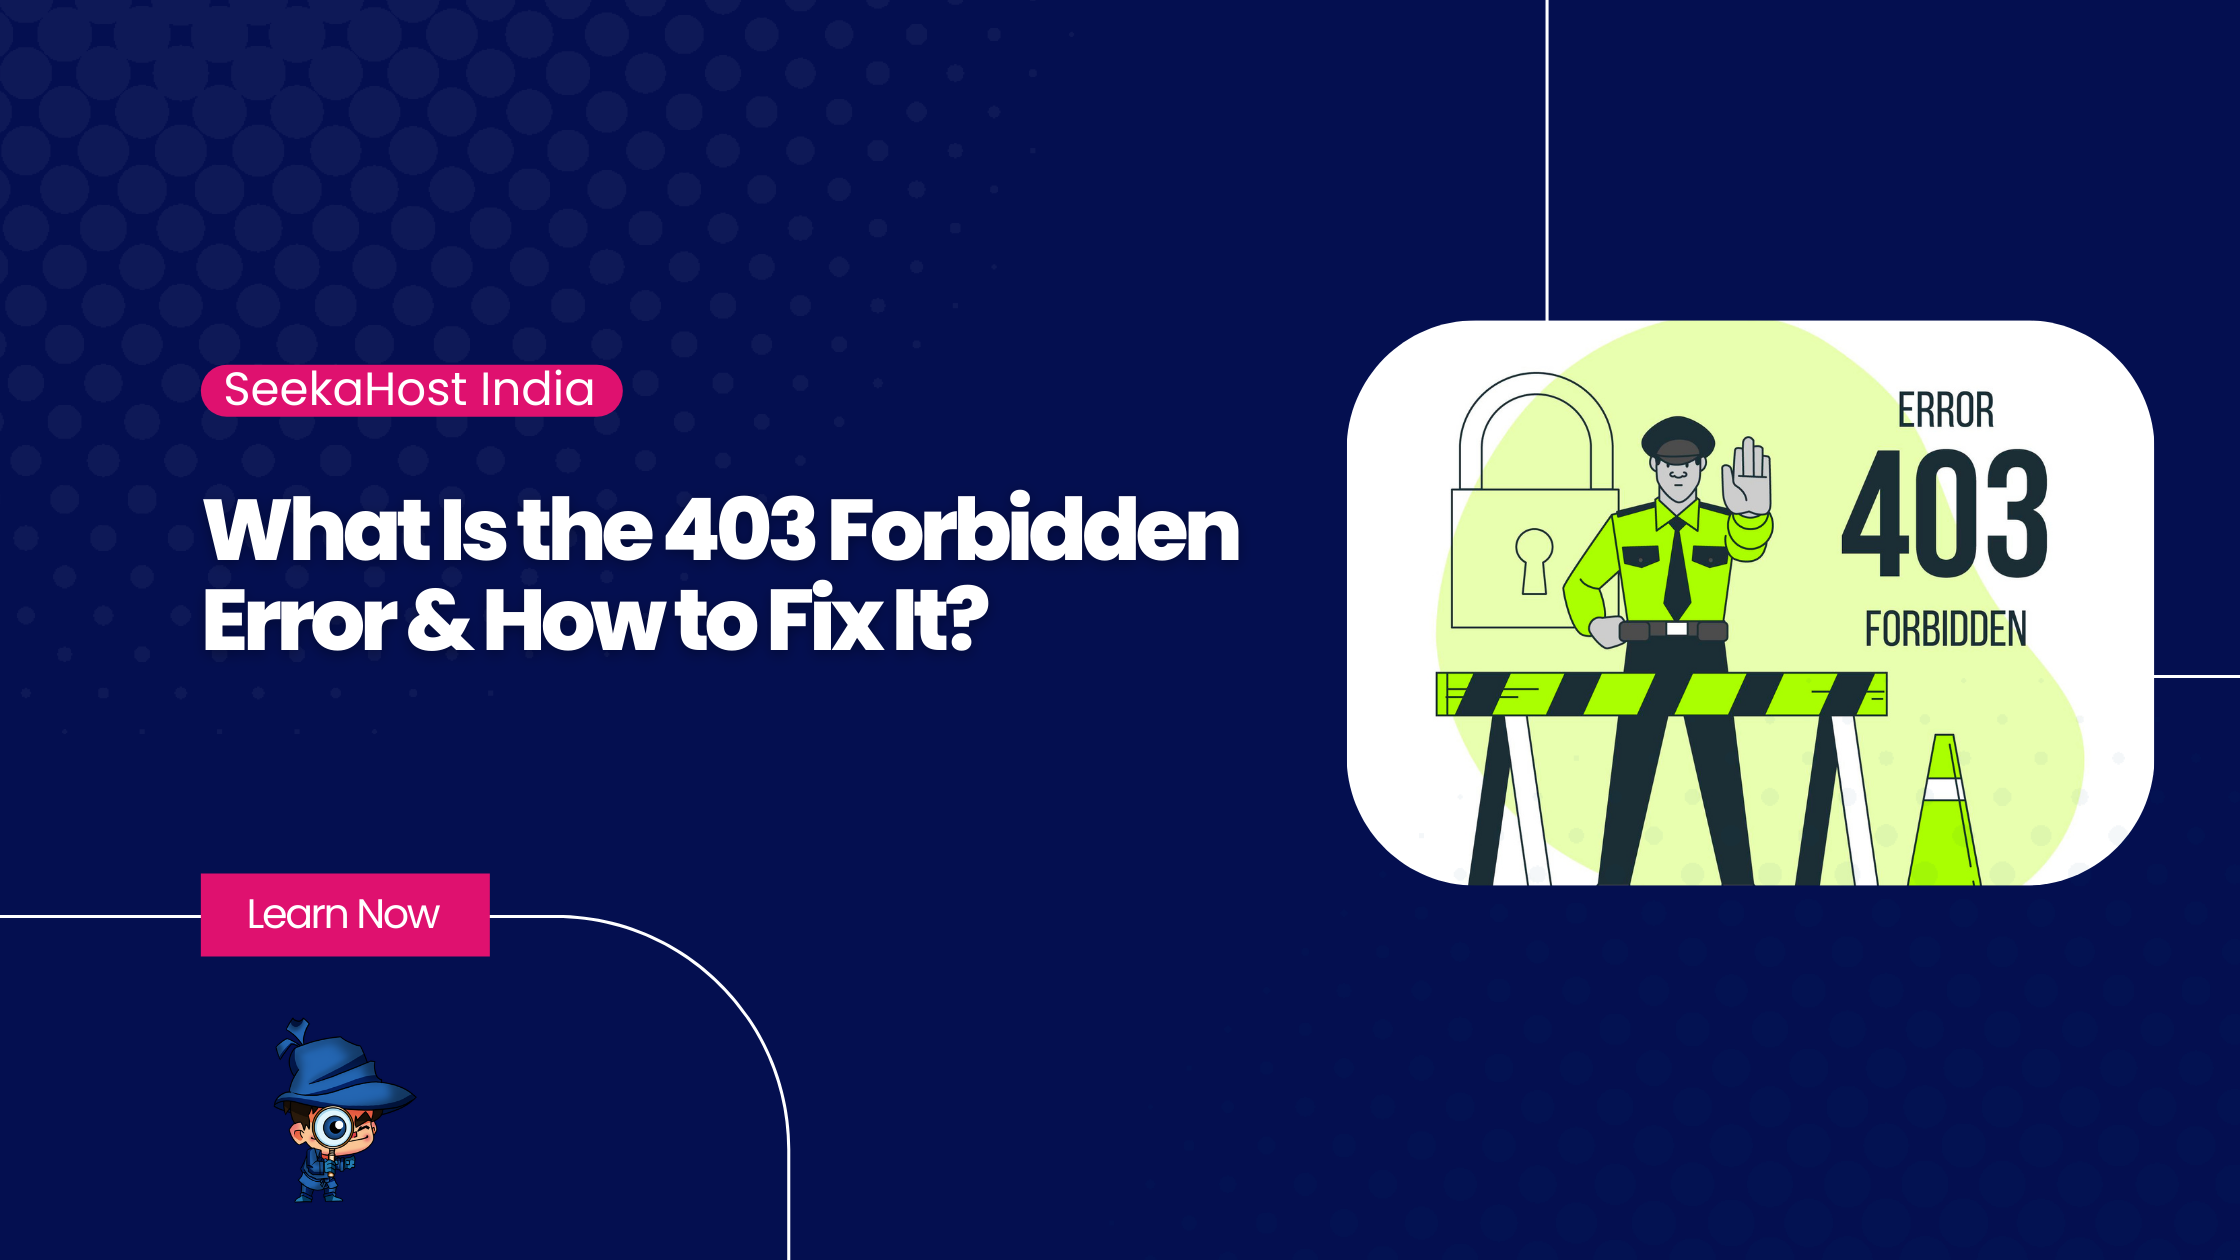 What Is the 403 Forbidden Error & How to Fix It